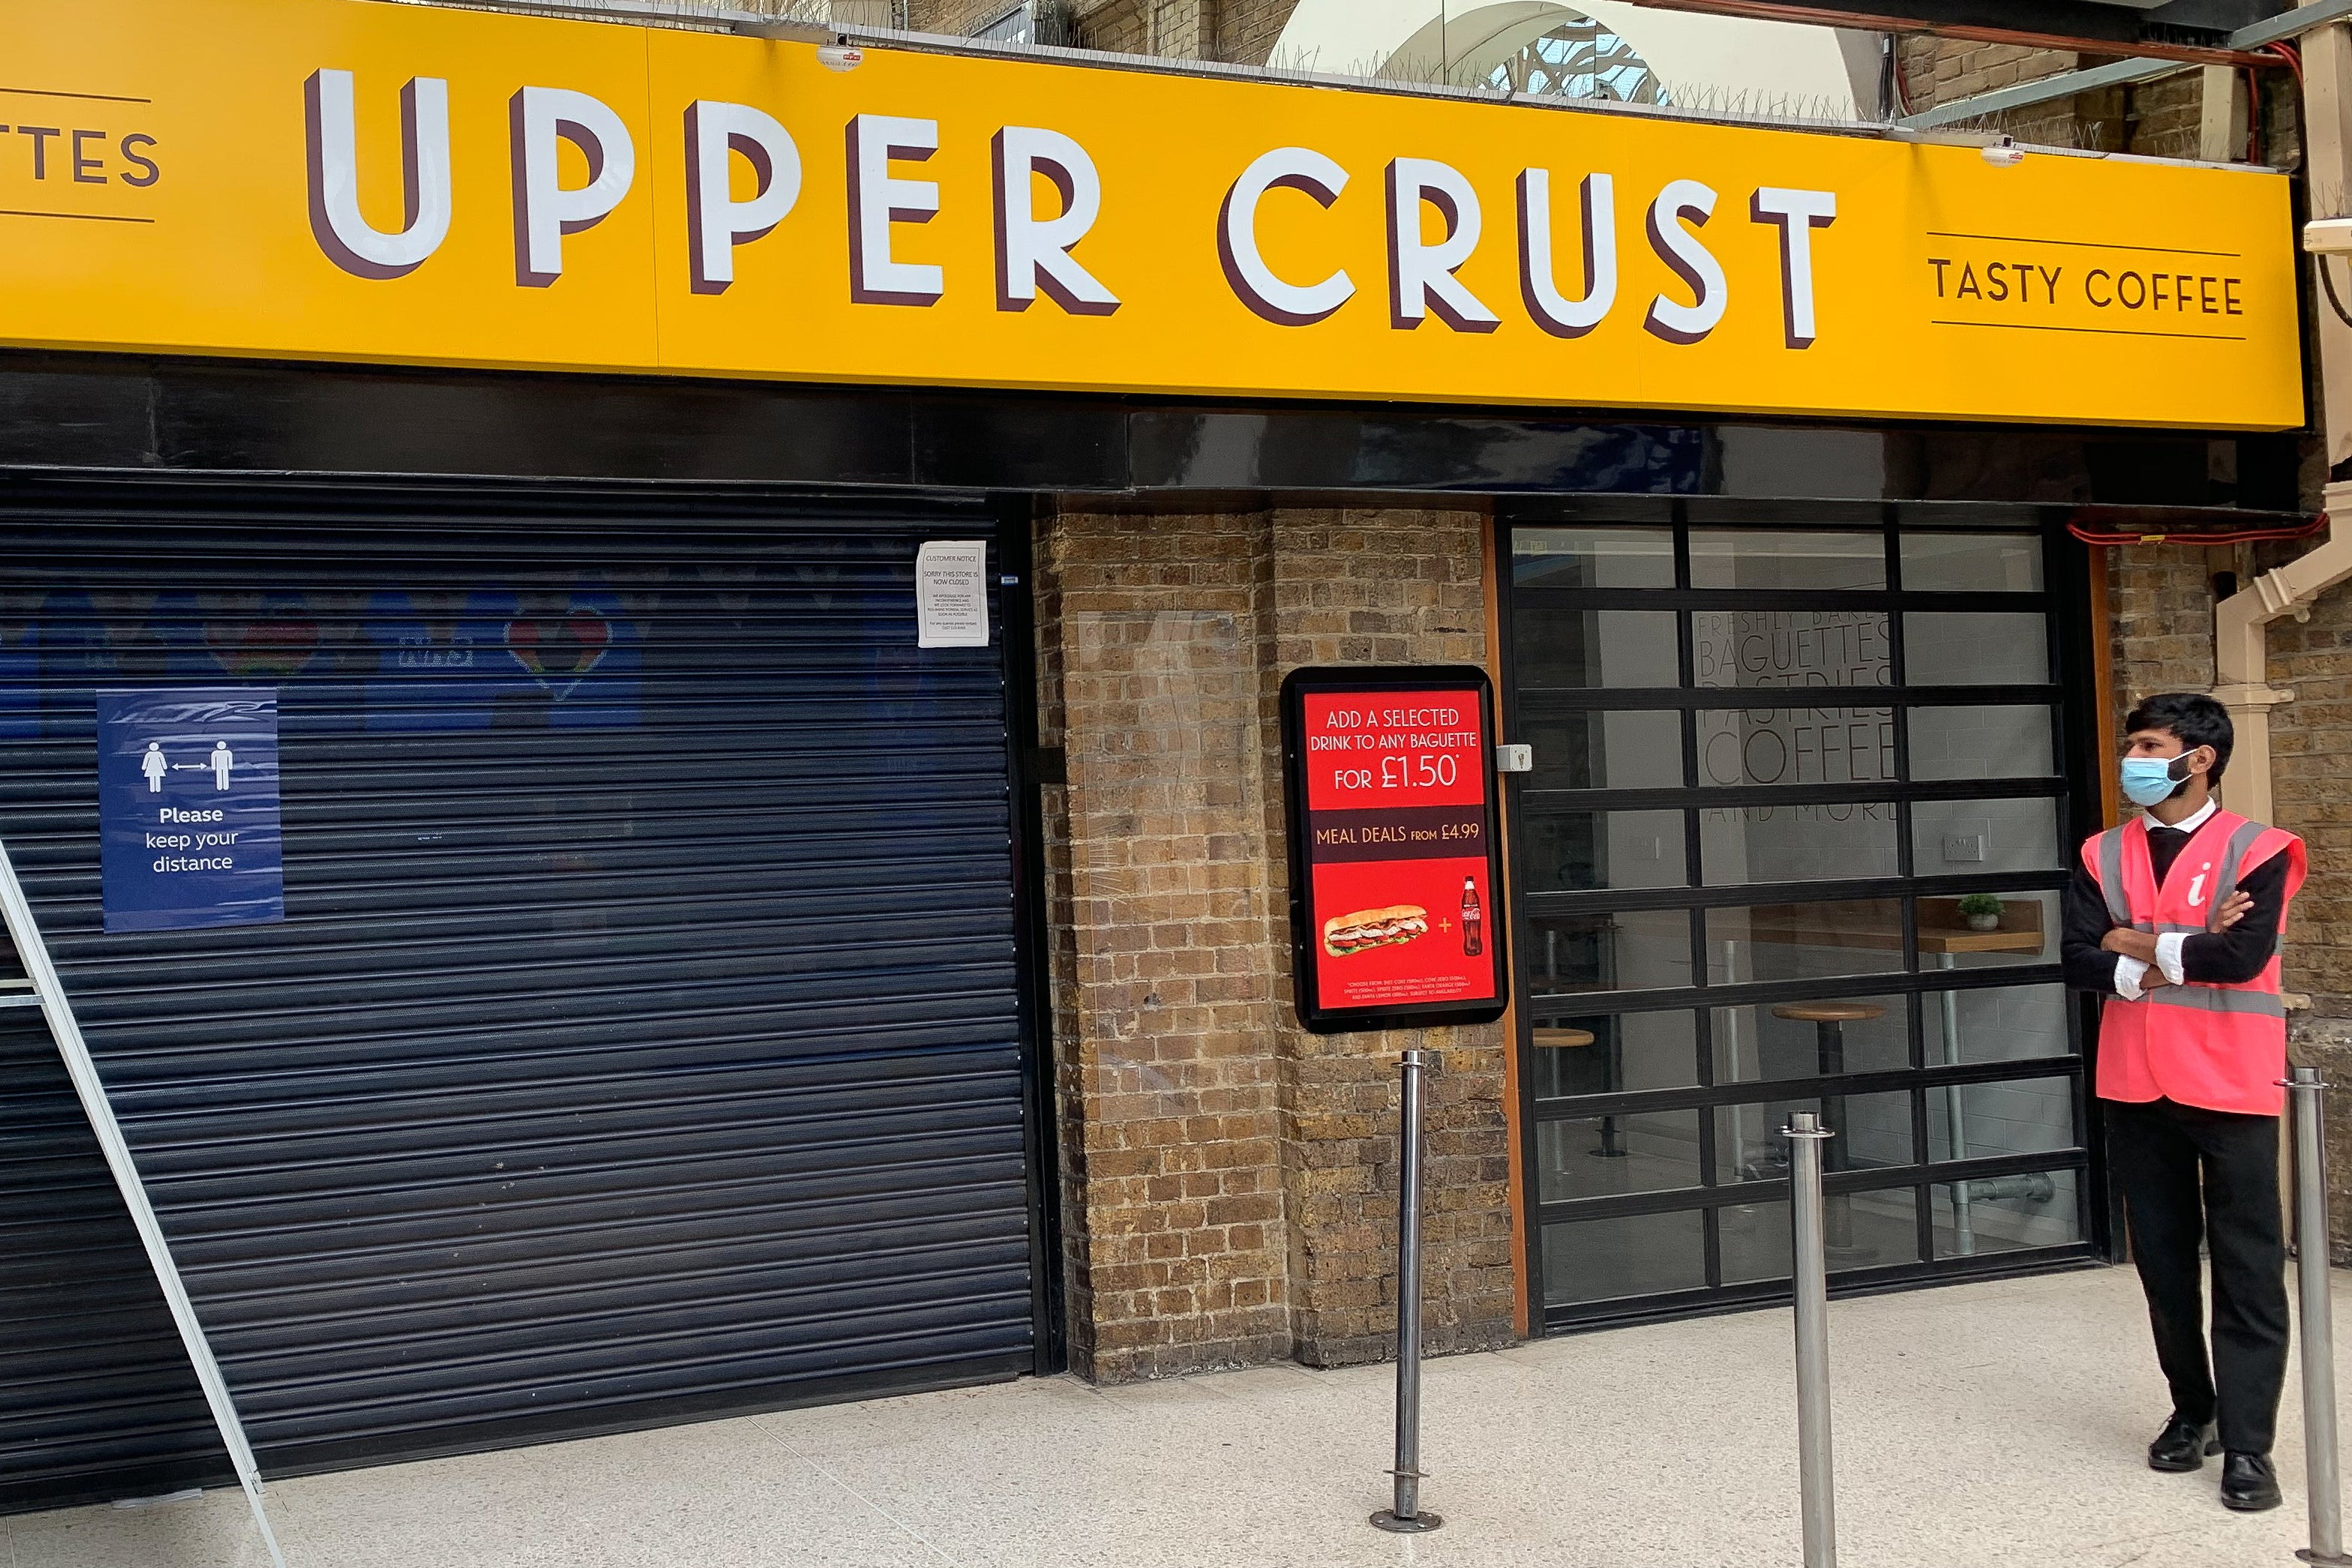 Upper Crust owner SSP has seen an improvement in business since the lockdown restrictions eased. (Aaron Chown / PA)